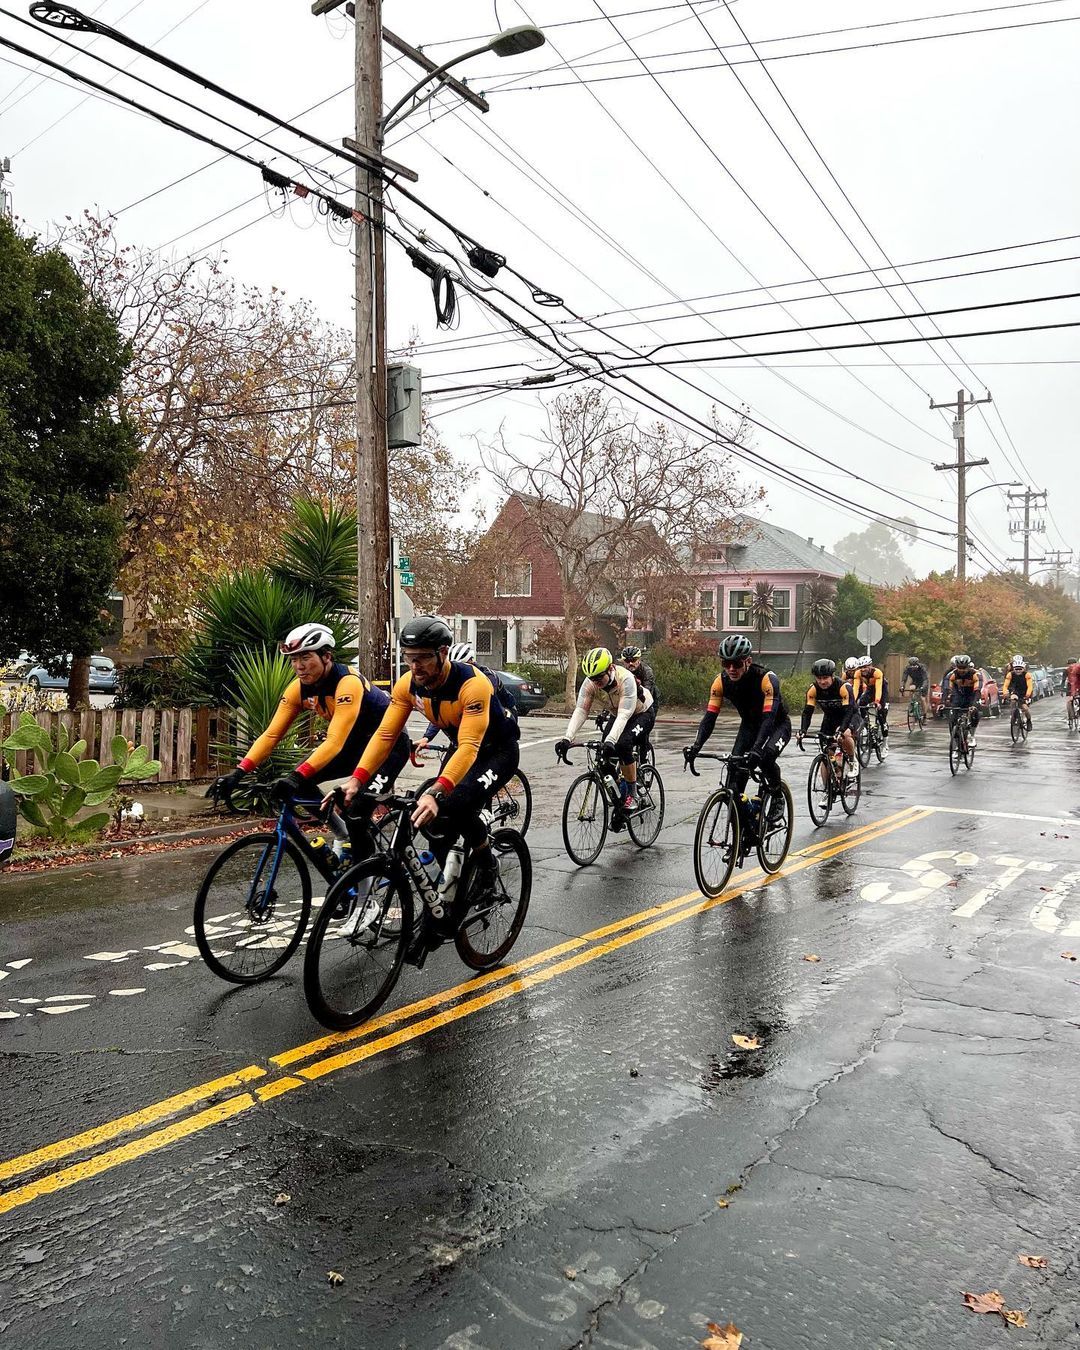 Wet and wild DVC team ride. Cleared up for some good times in the East Bay!

@obbi.cc @sfitalianathleticclub @equatorcoffees @achieveptc @untappedmaple @tripsforkidsmarin  @worldbicyclerelief @marinservicecourse @osmonutrition @jkbrkb #themenkegeoup #onewealthadvisors